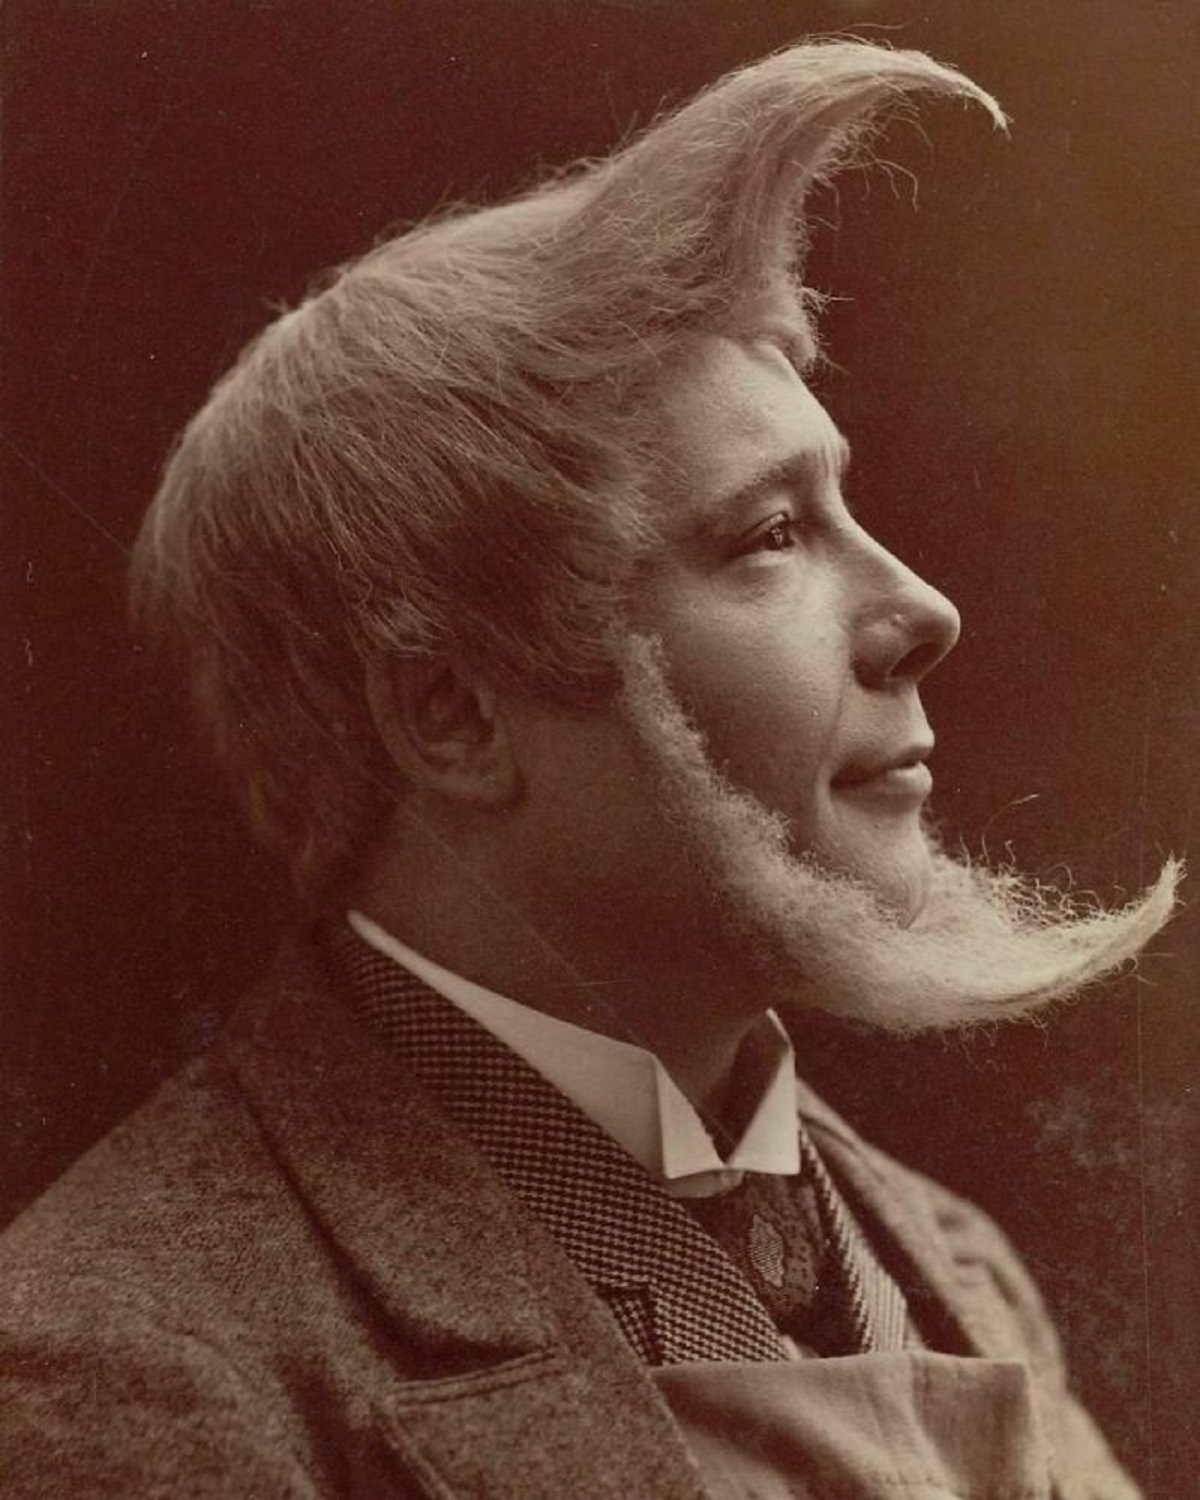 Could Be The Man In The Moon, Circa 1894-1895. (Photo By Nadar)